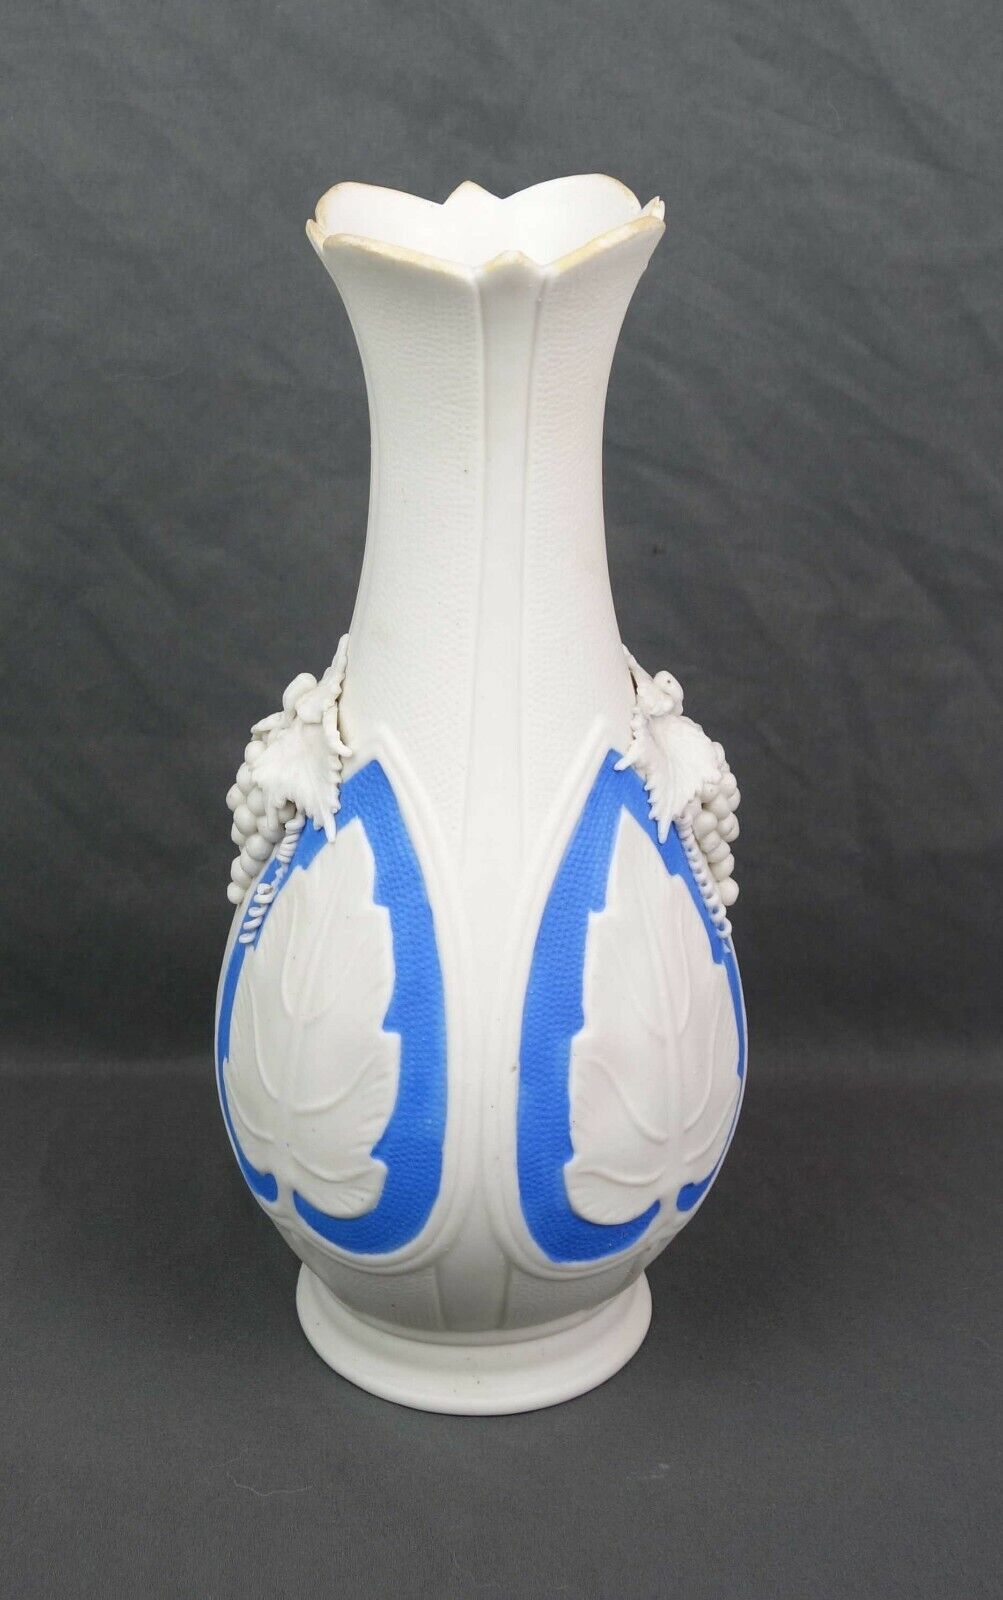 Vintage Early Parian Blue and White Bisque Double Handled Vase with Grapes